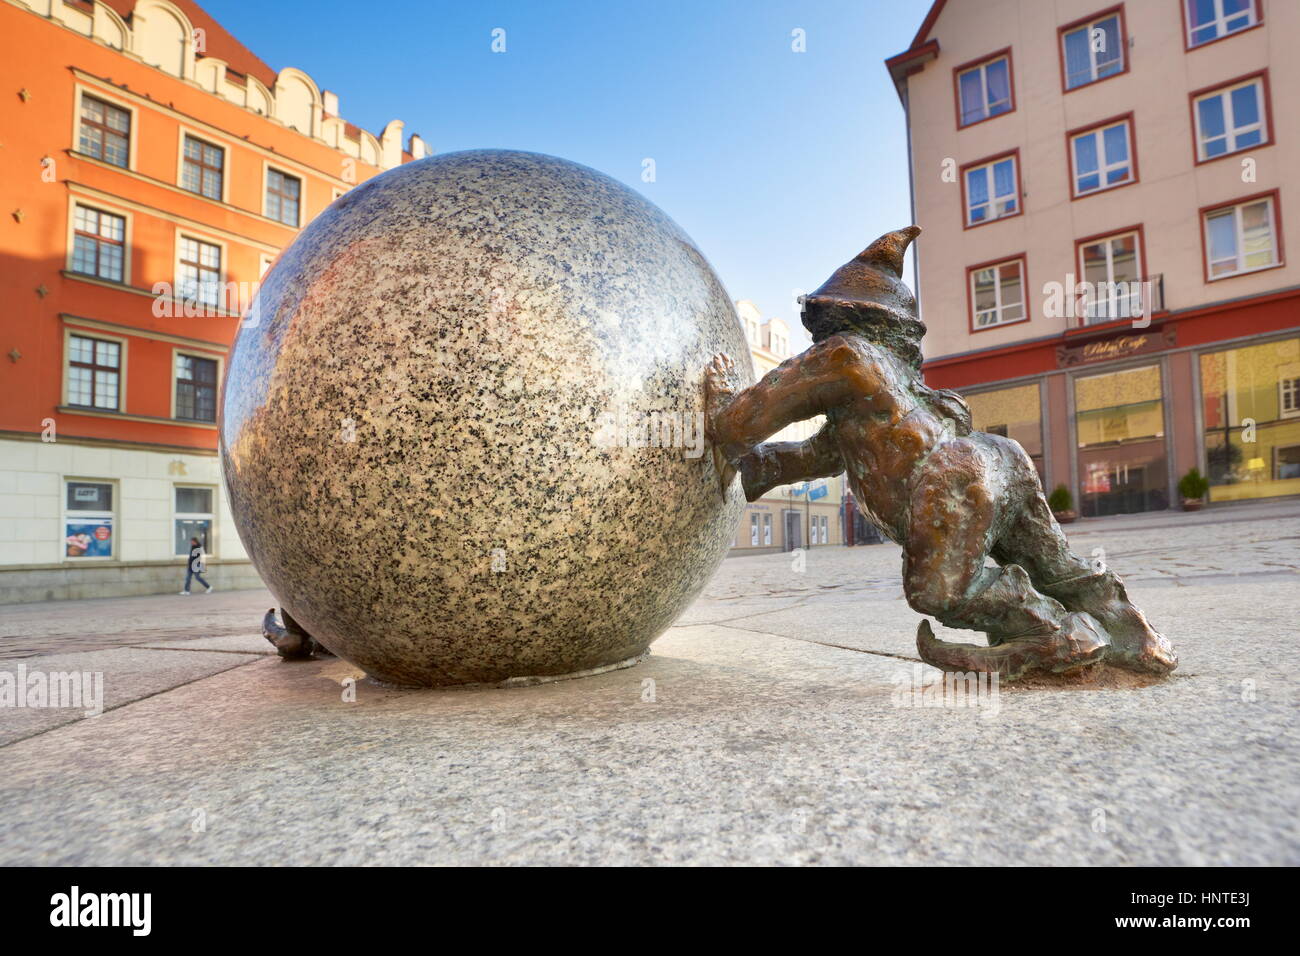 Nain de Wroclaw (petite rue sculptures), Wroclaw, Pologne, Europe Banque D'Images